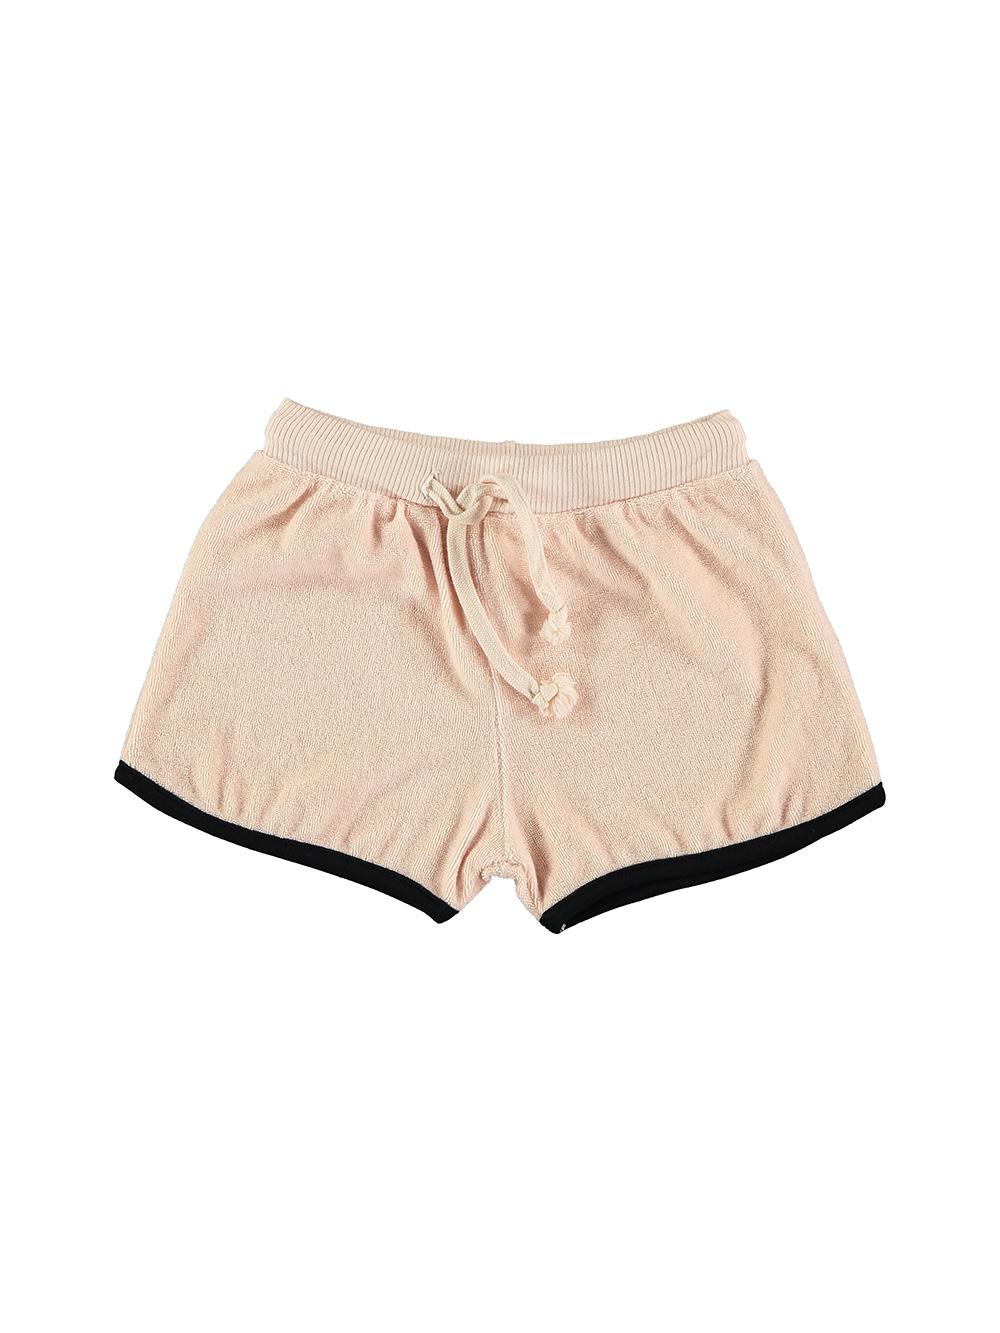 PALE PINK SHORTS WITH DRAWSTRING AND BLACK TRIM